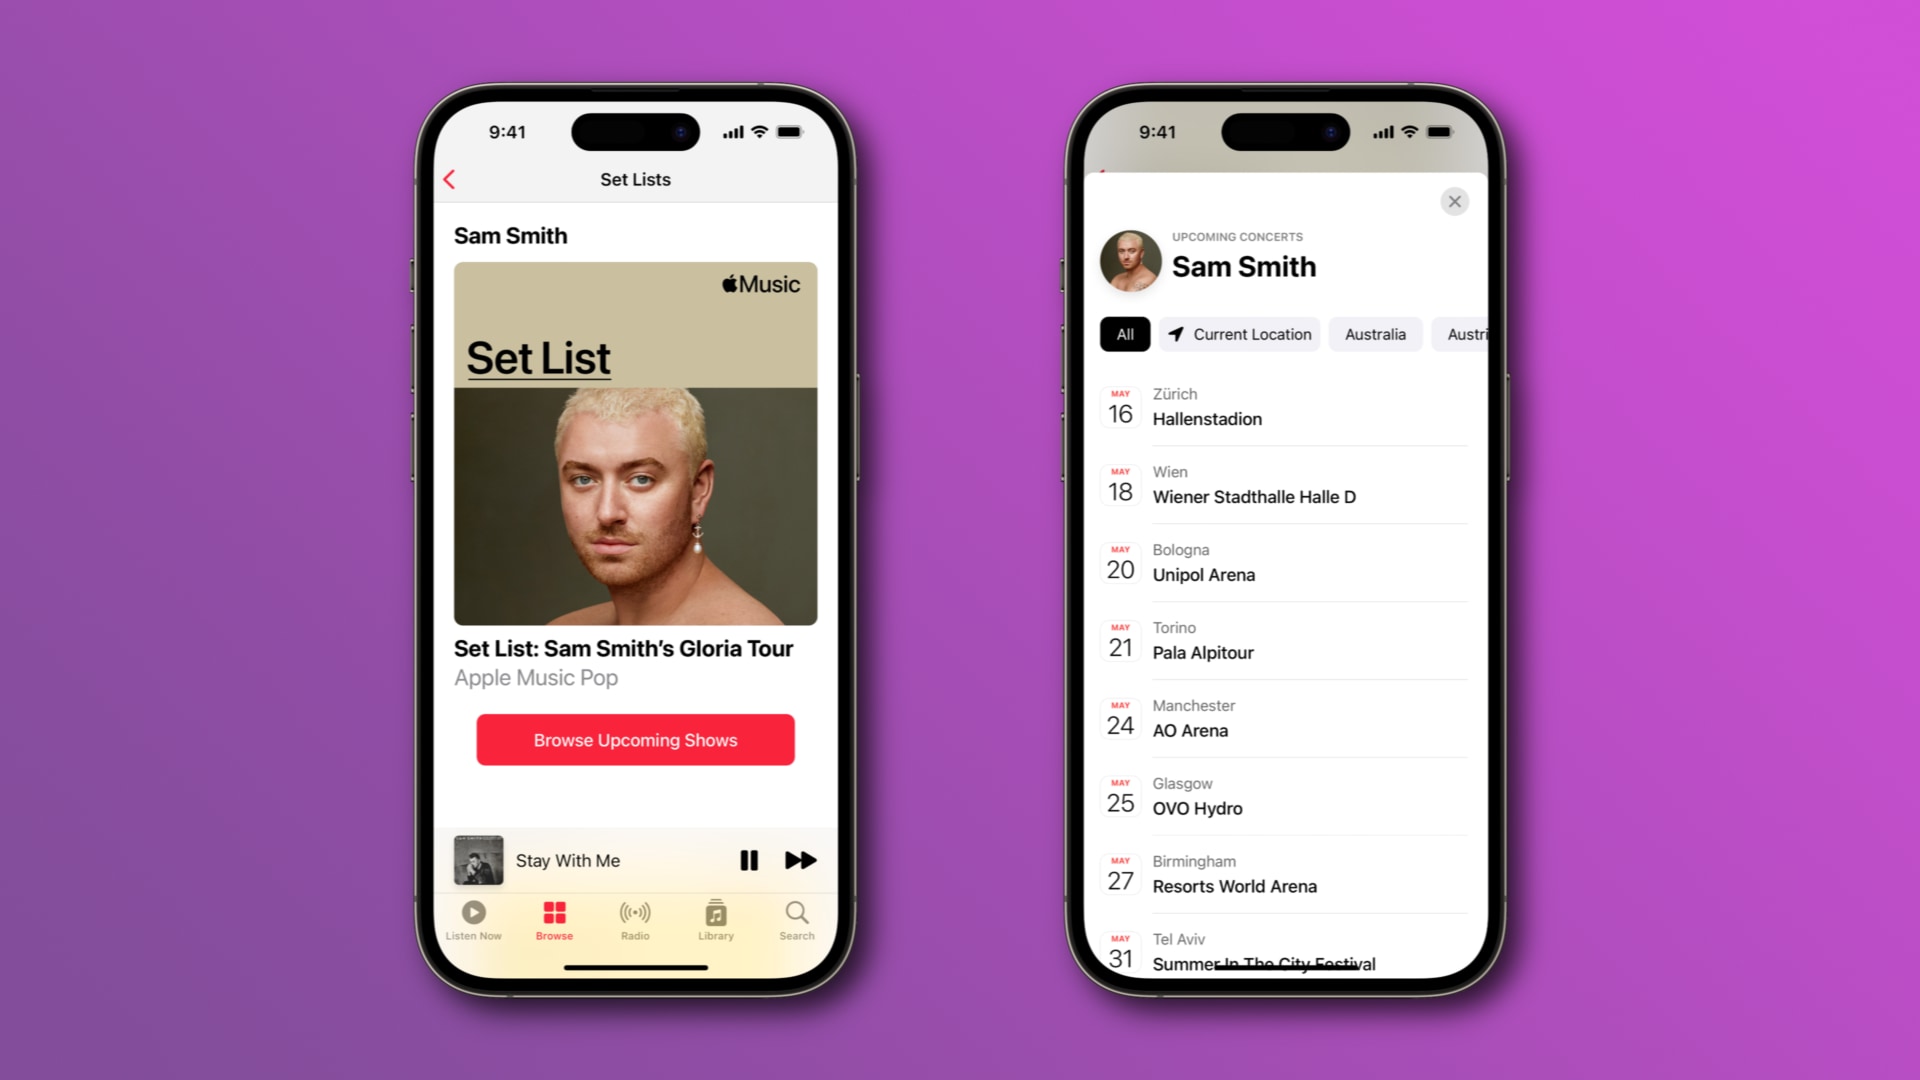 Apple Music and Maps gain new concert discovery features on iPhone, iPad and Mac